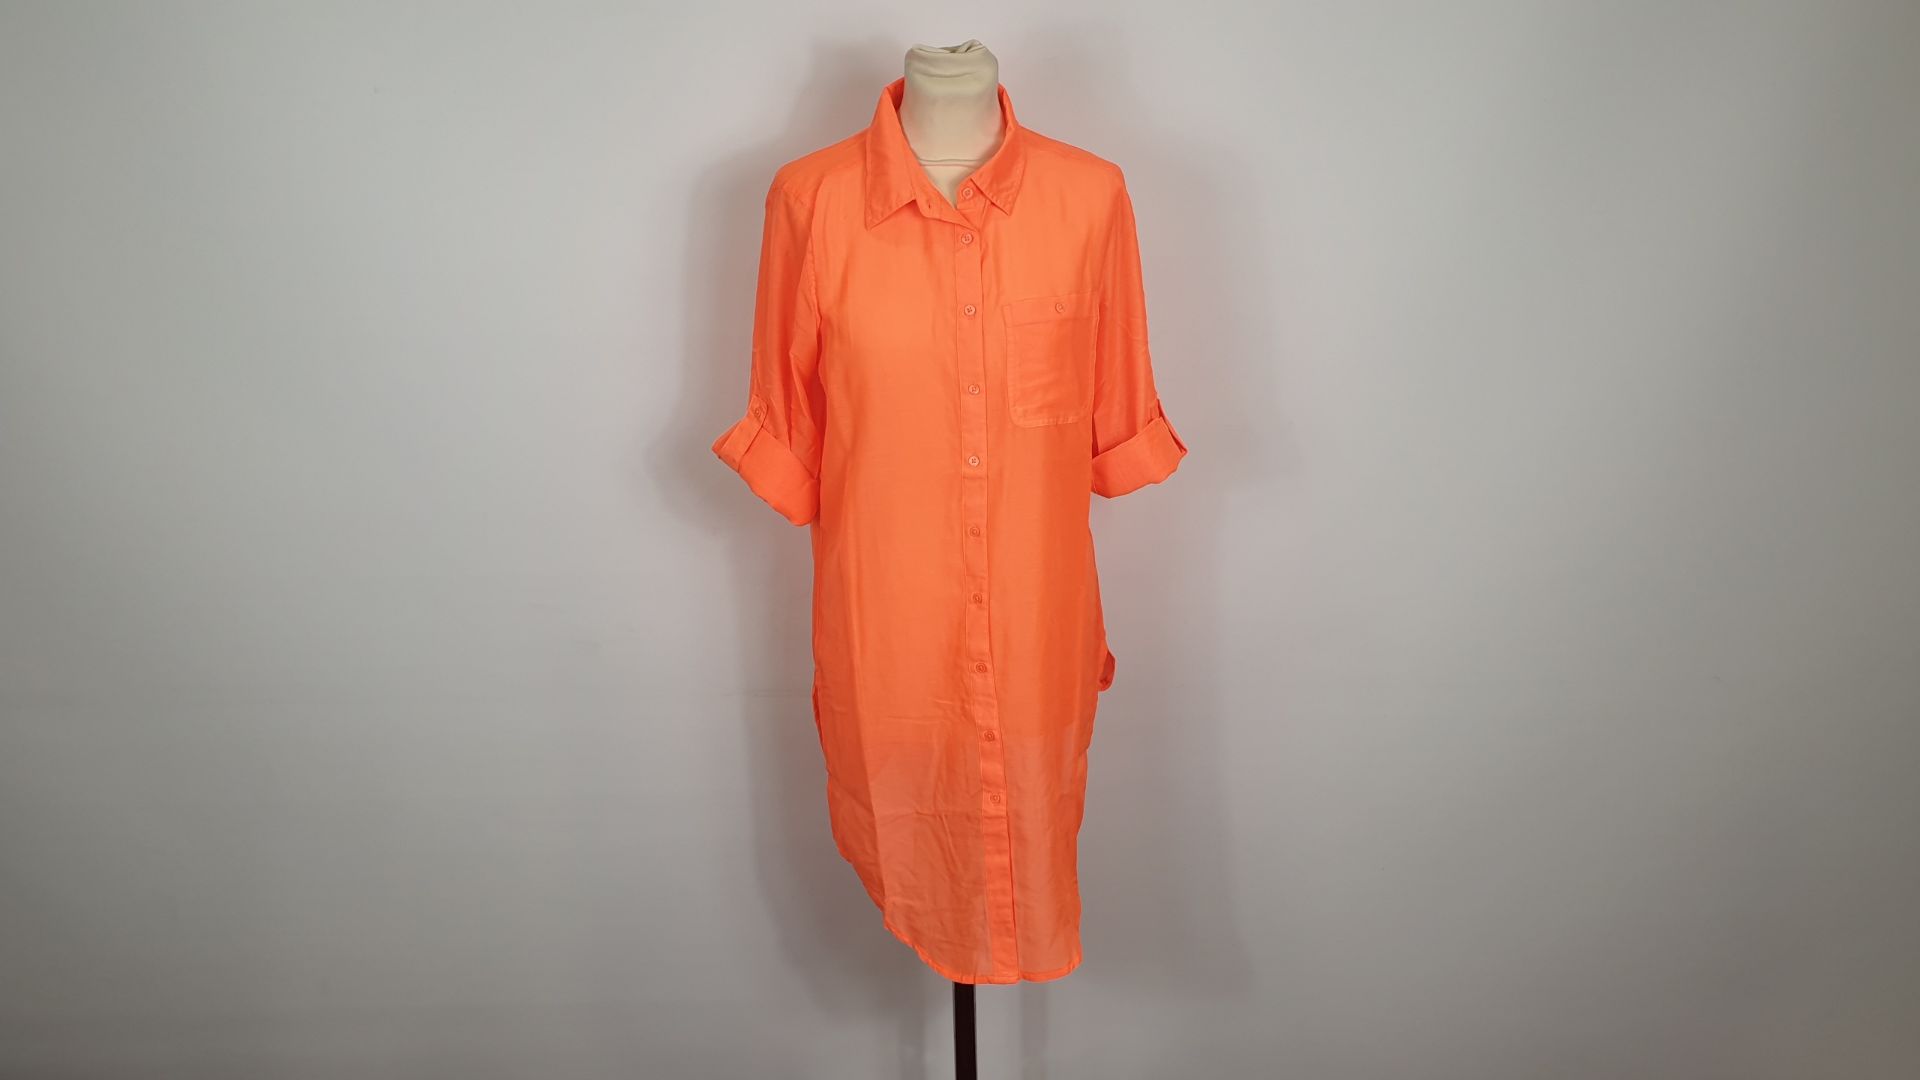 100 X BRAND NEW BRIGHT ORANGE BEACH SHIRTS BY GEORGE - SIZE L - (28890) RRP £8 EACH - IN 1 CARTON